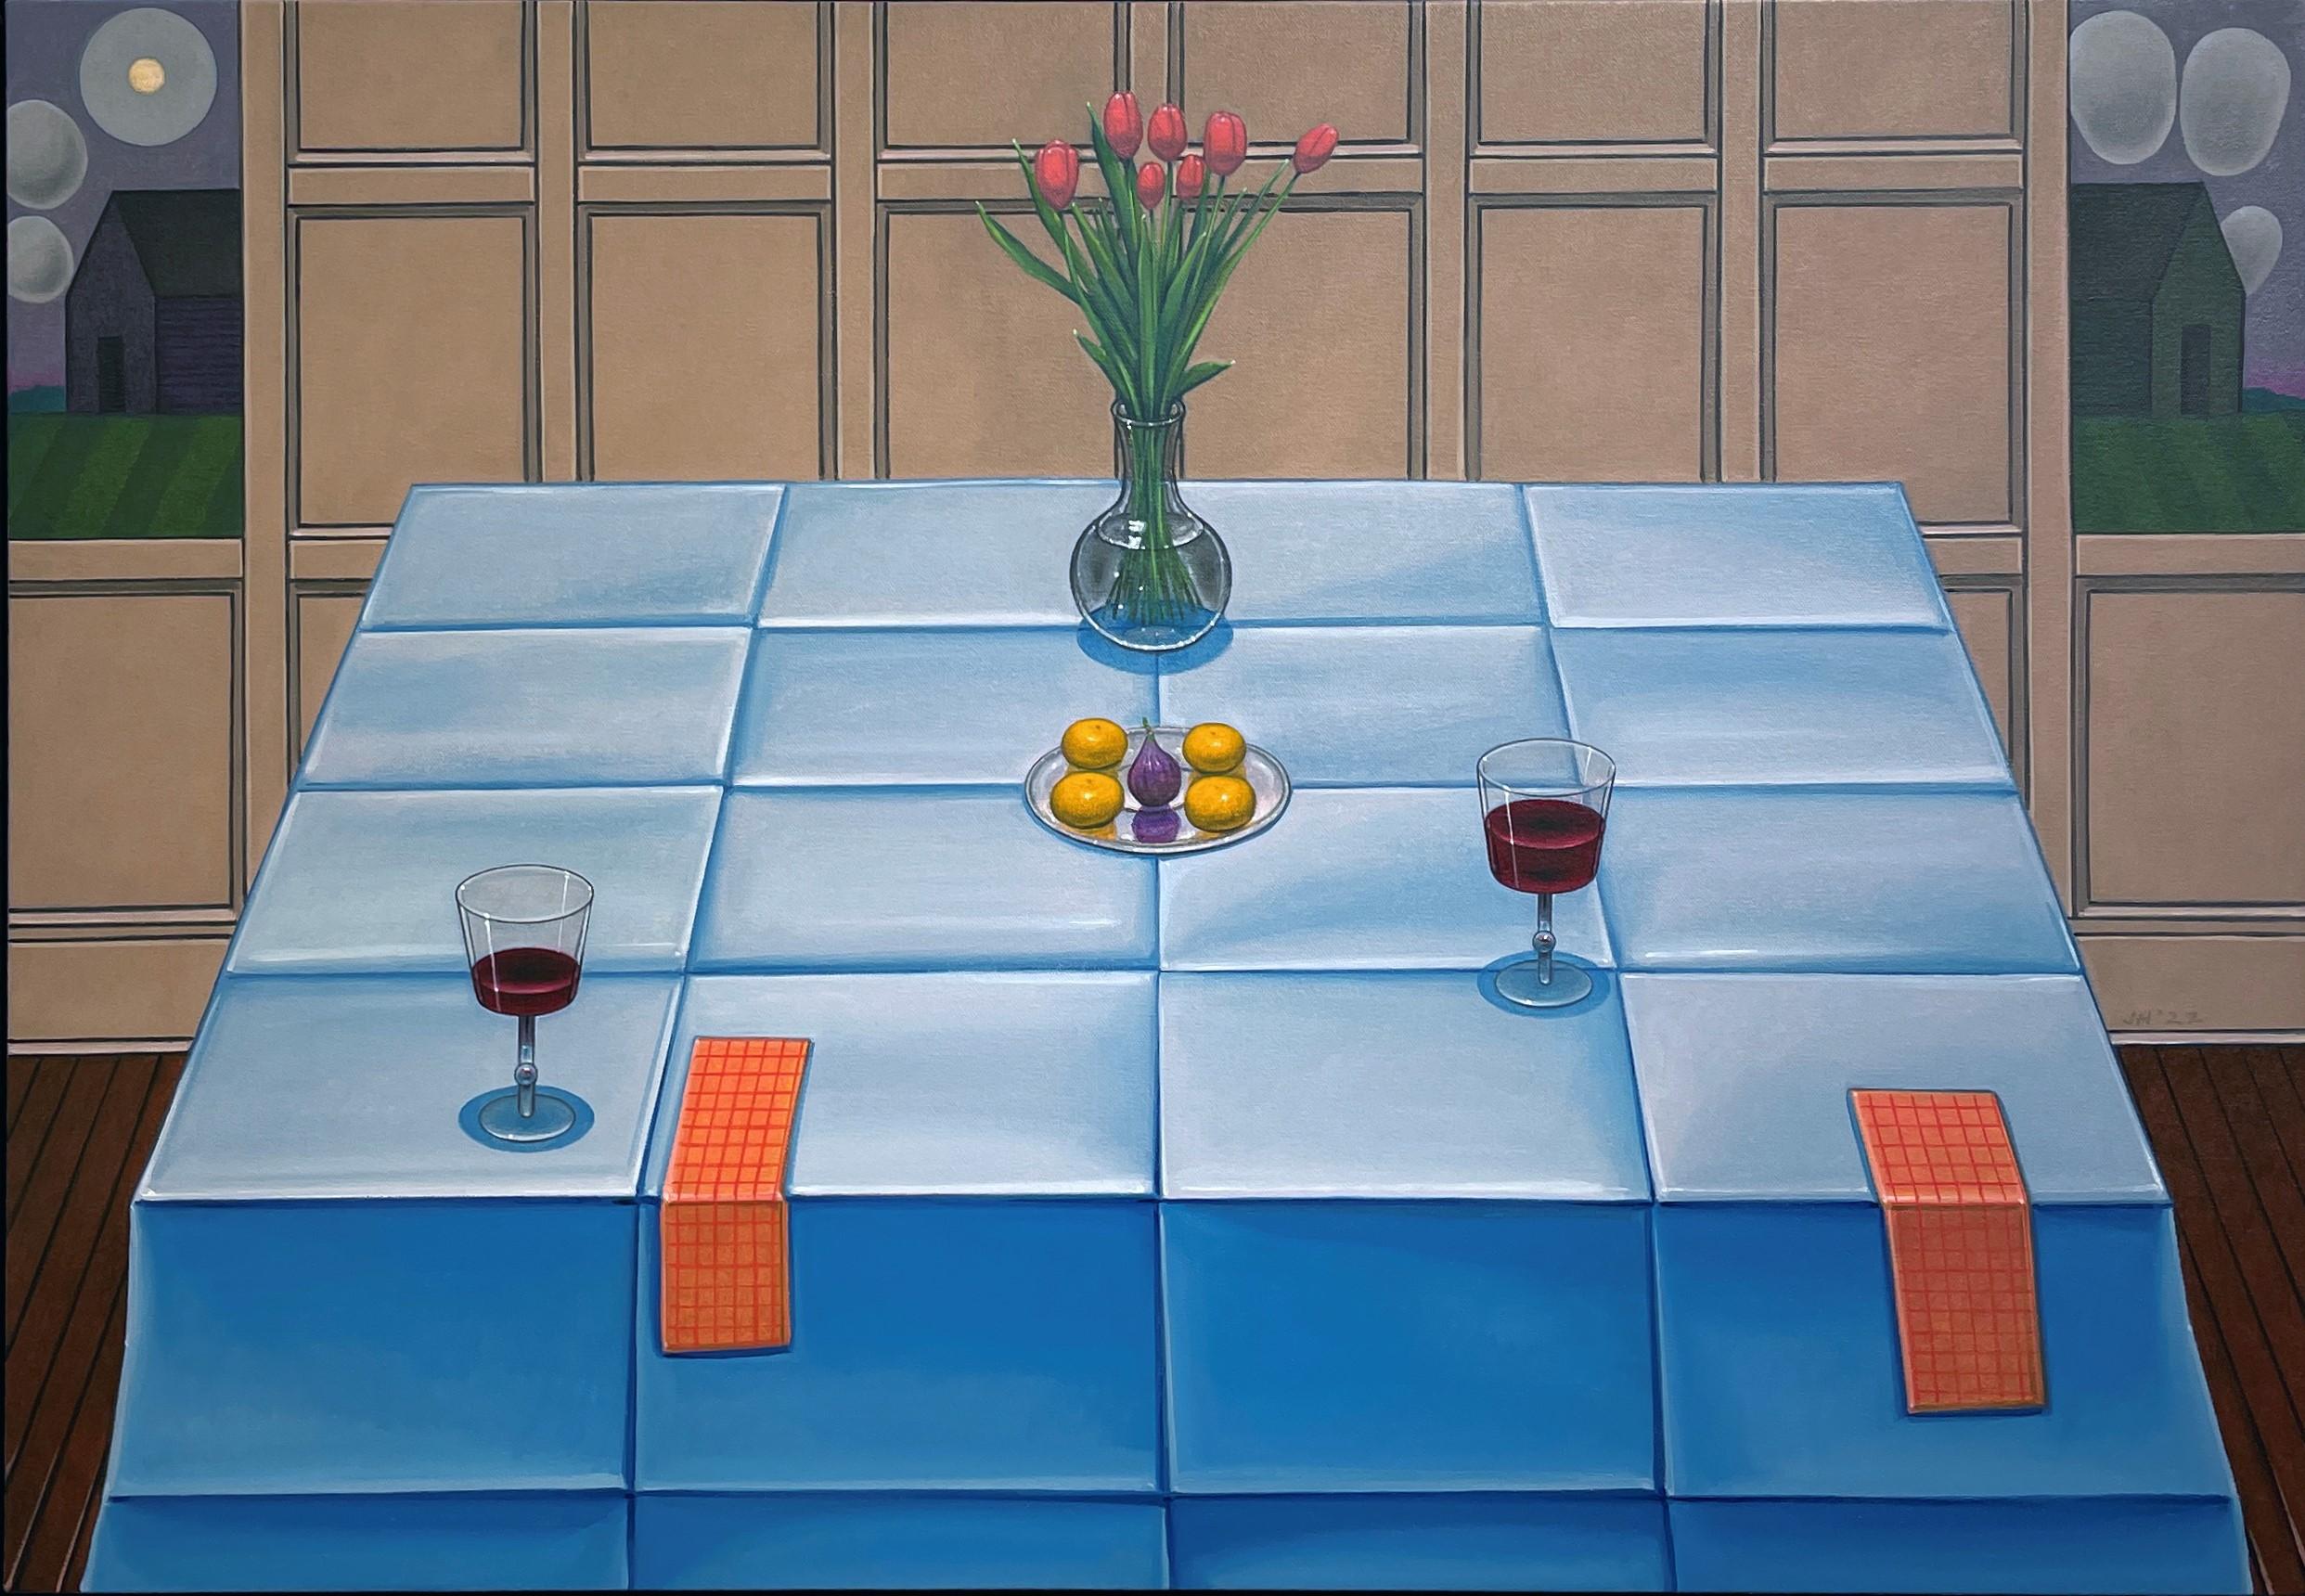 Dessert - Surreal Scene with Table Setting, Geometric Patterns, Oil on Panel